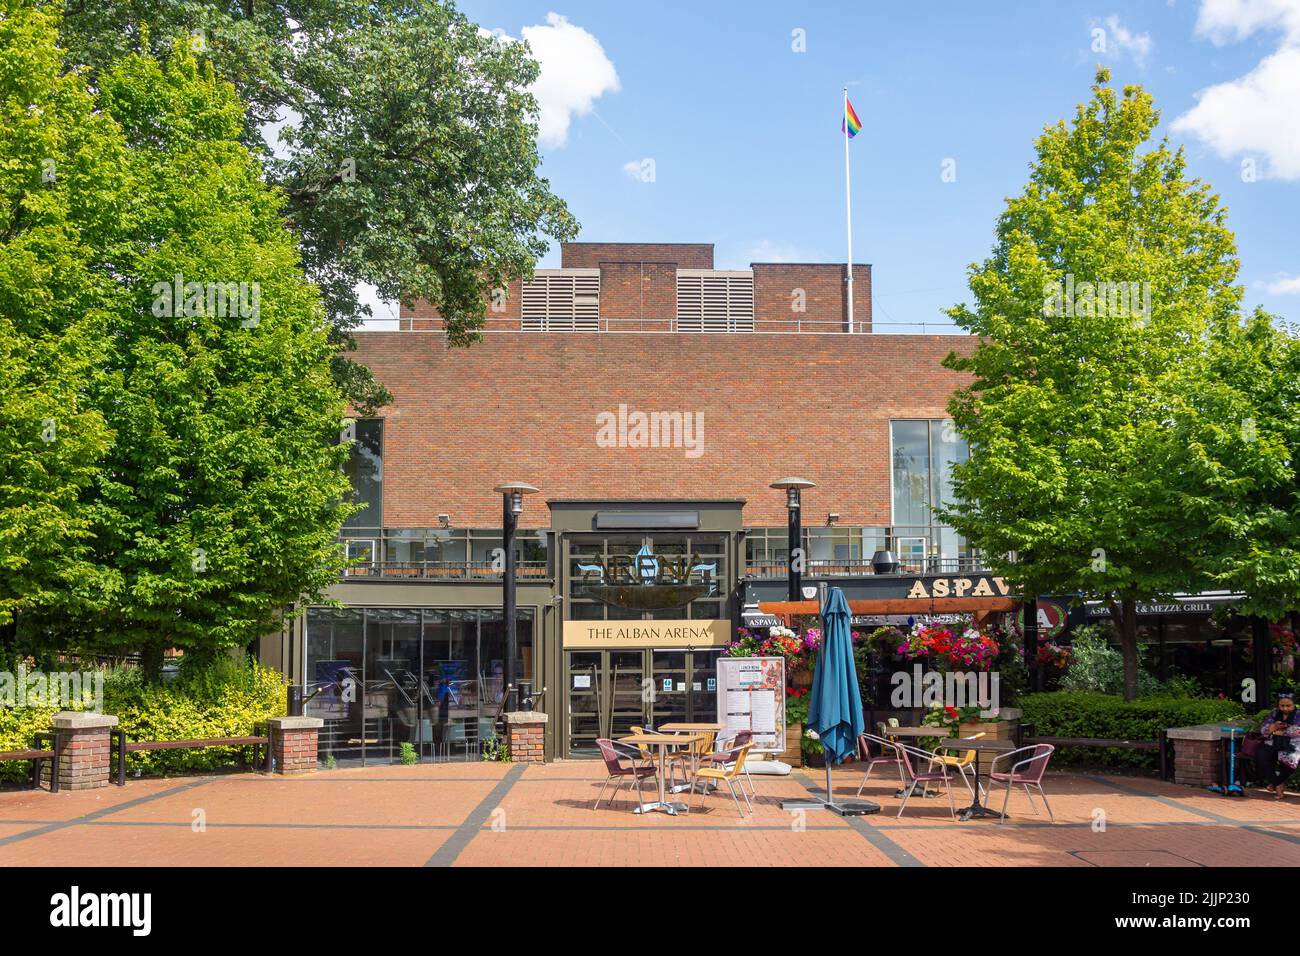 Alban arena hi-res stock photography and images - Alamy